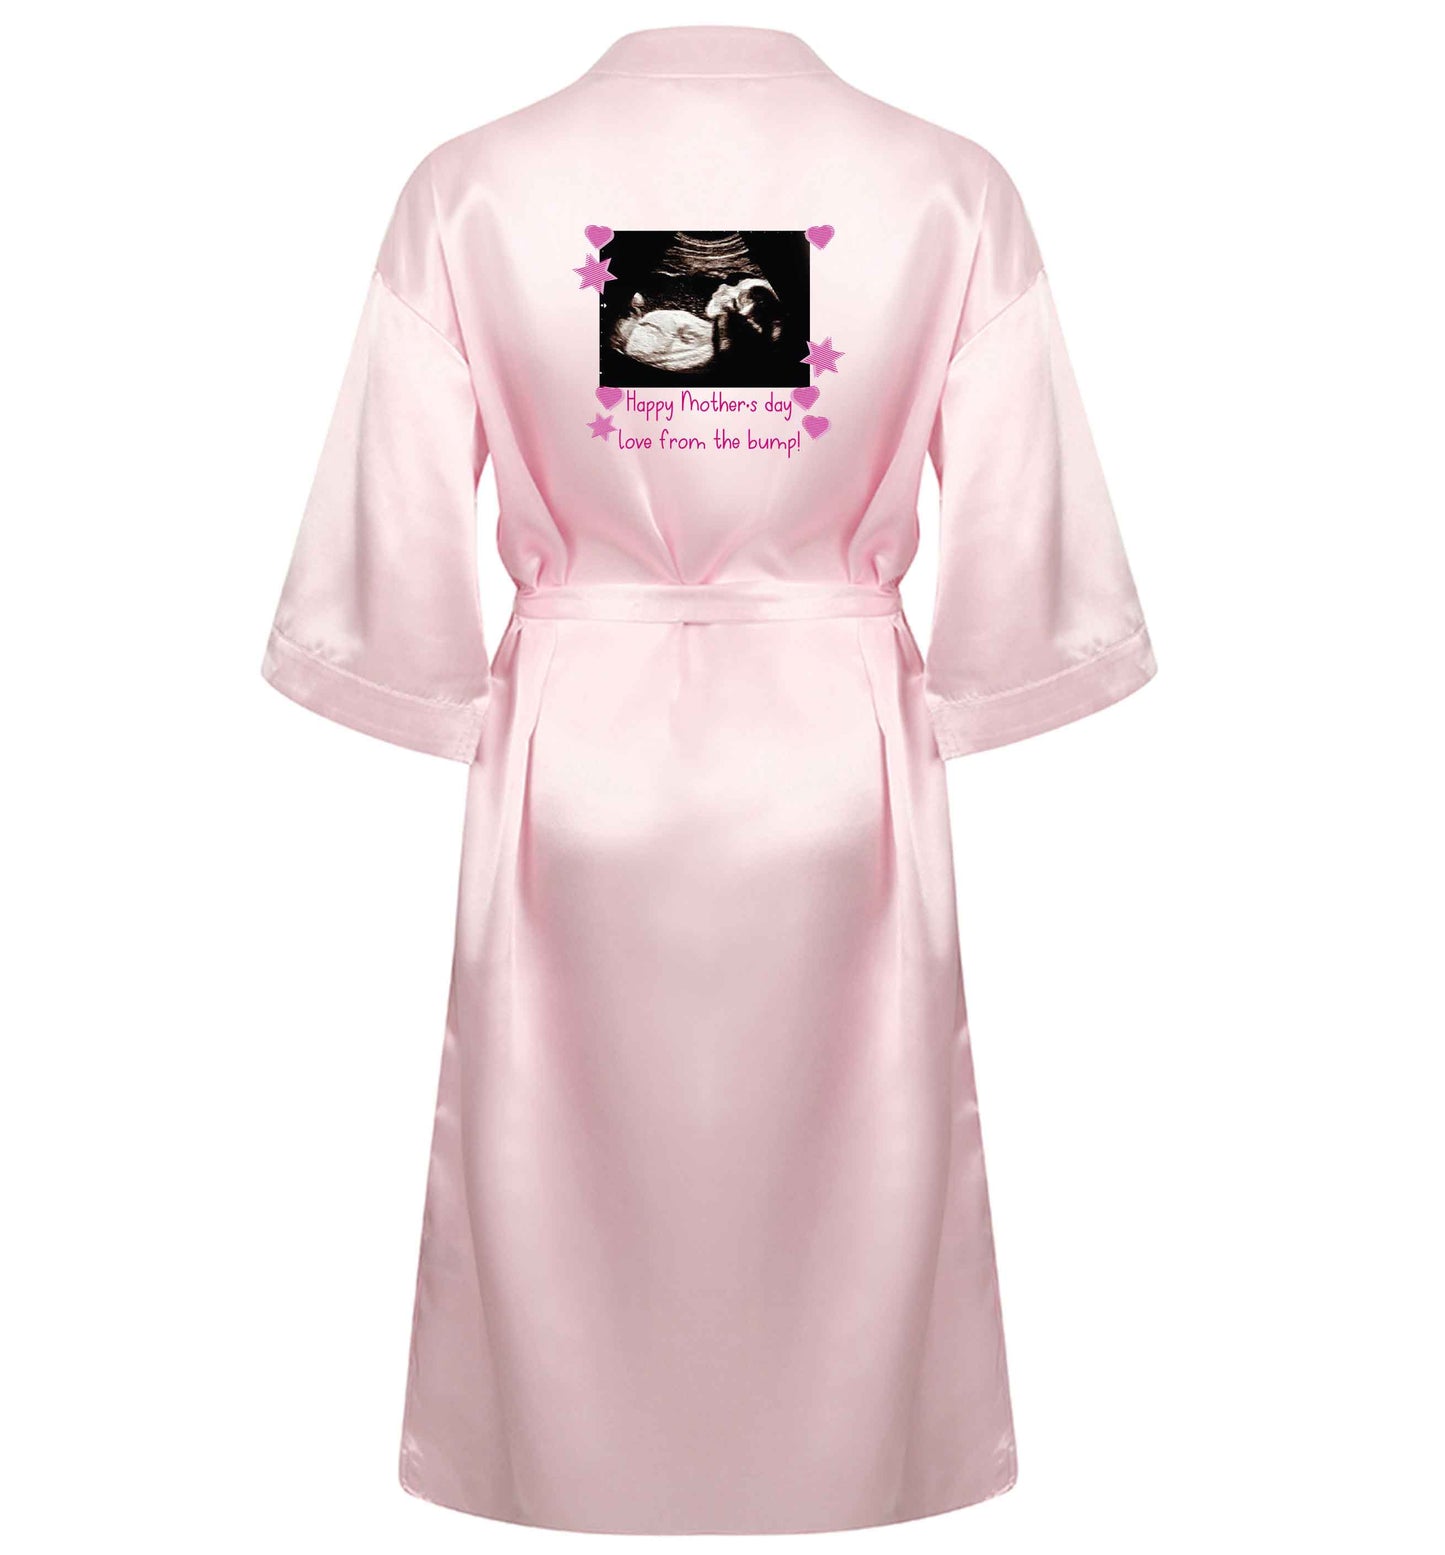 Happy Mother's day love from the bump - pink  XL/XXL pink ladies dressing gown size 16/18